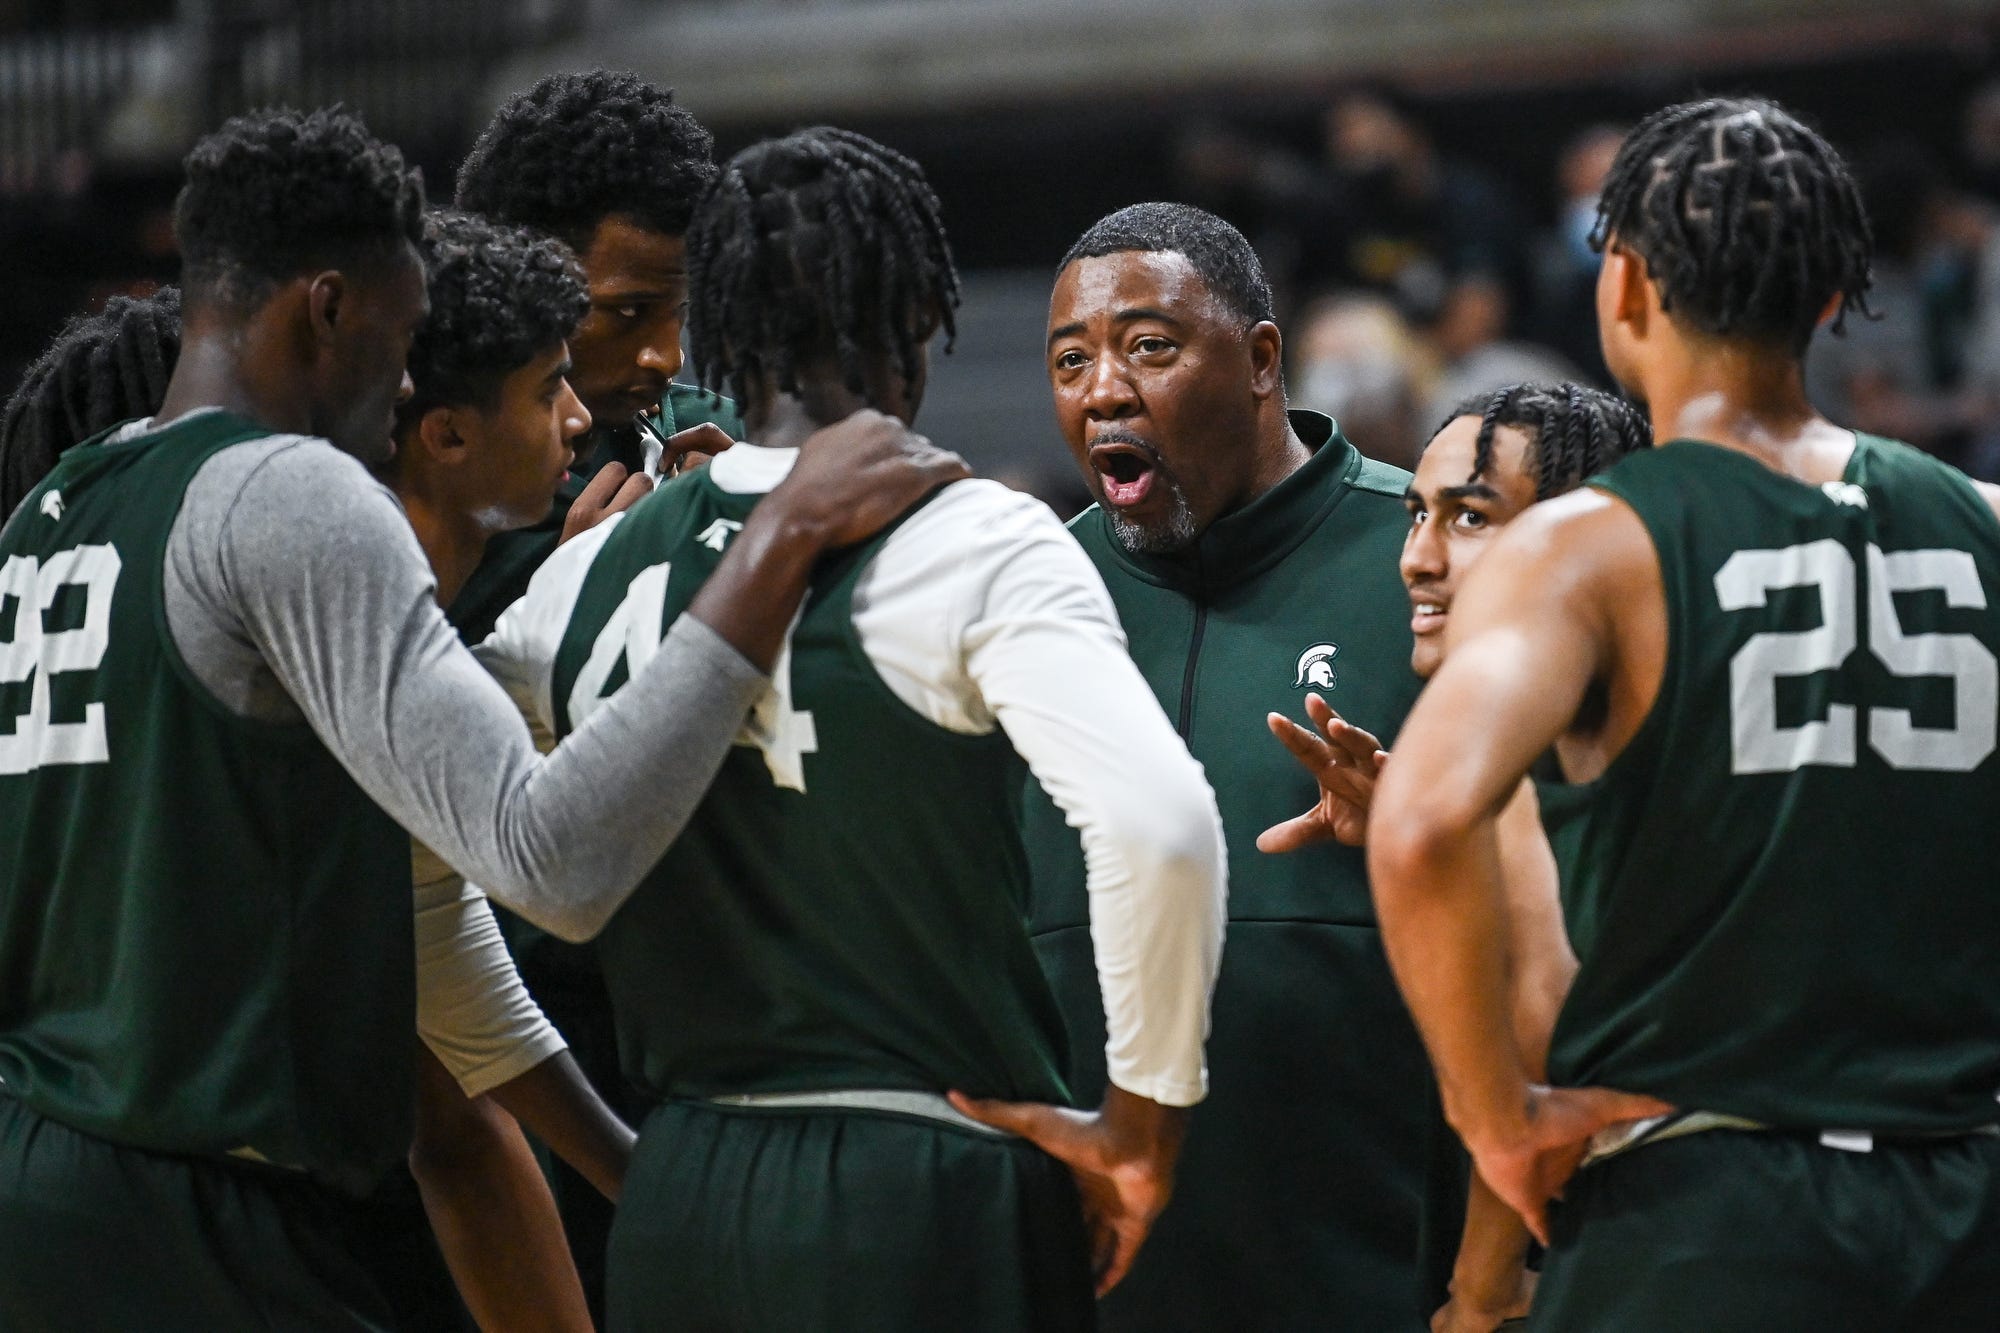 Does Michigan State basketball miss Dwayne Stephens?